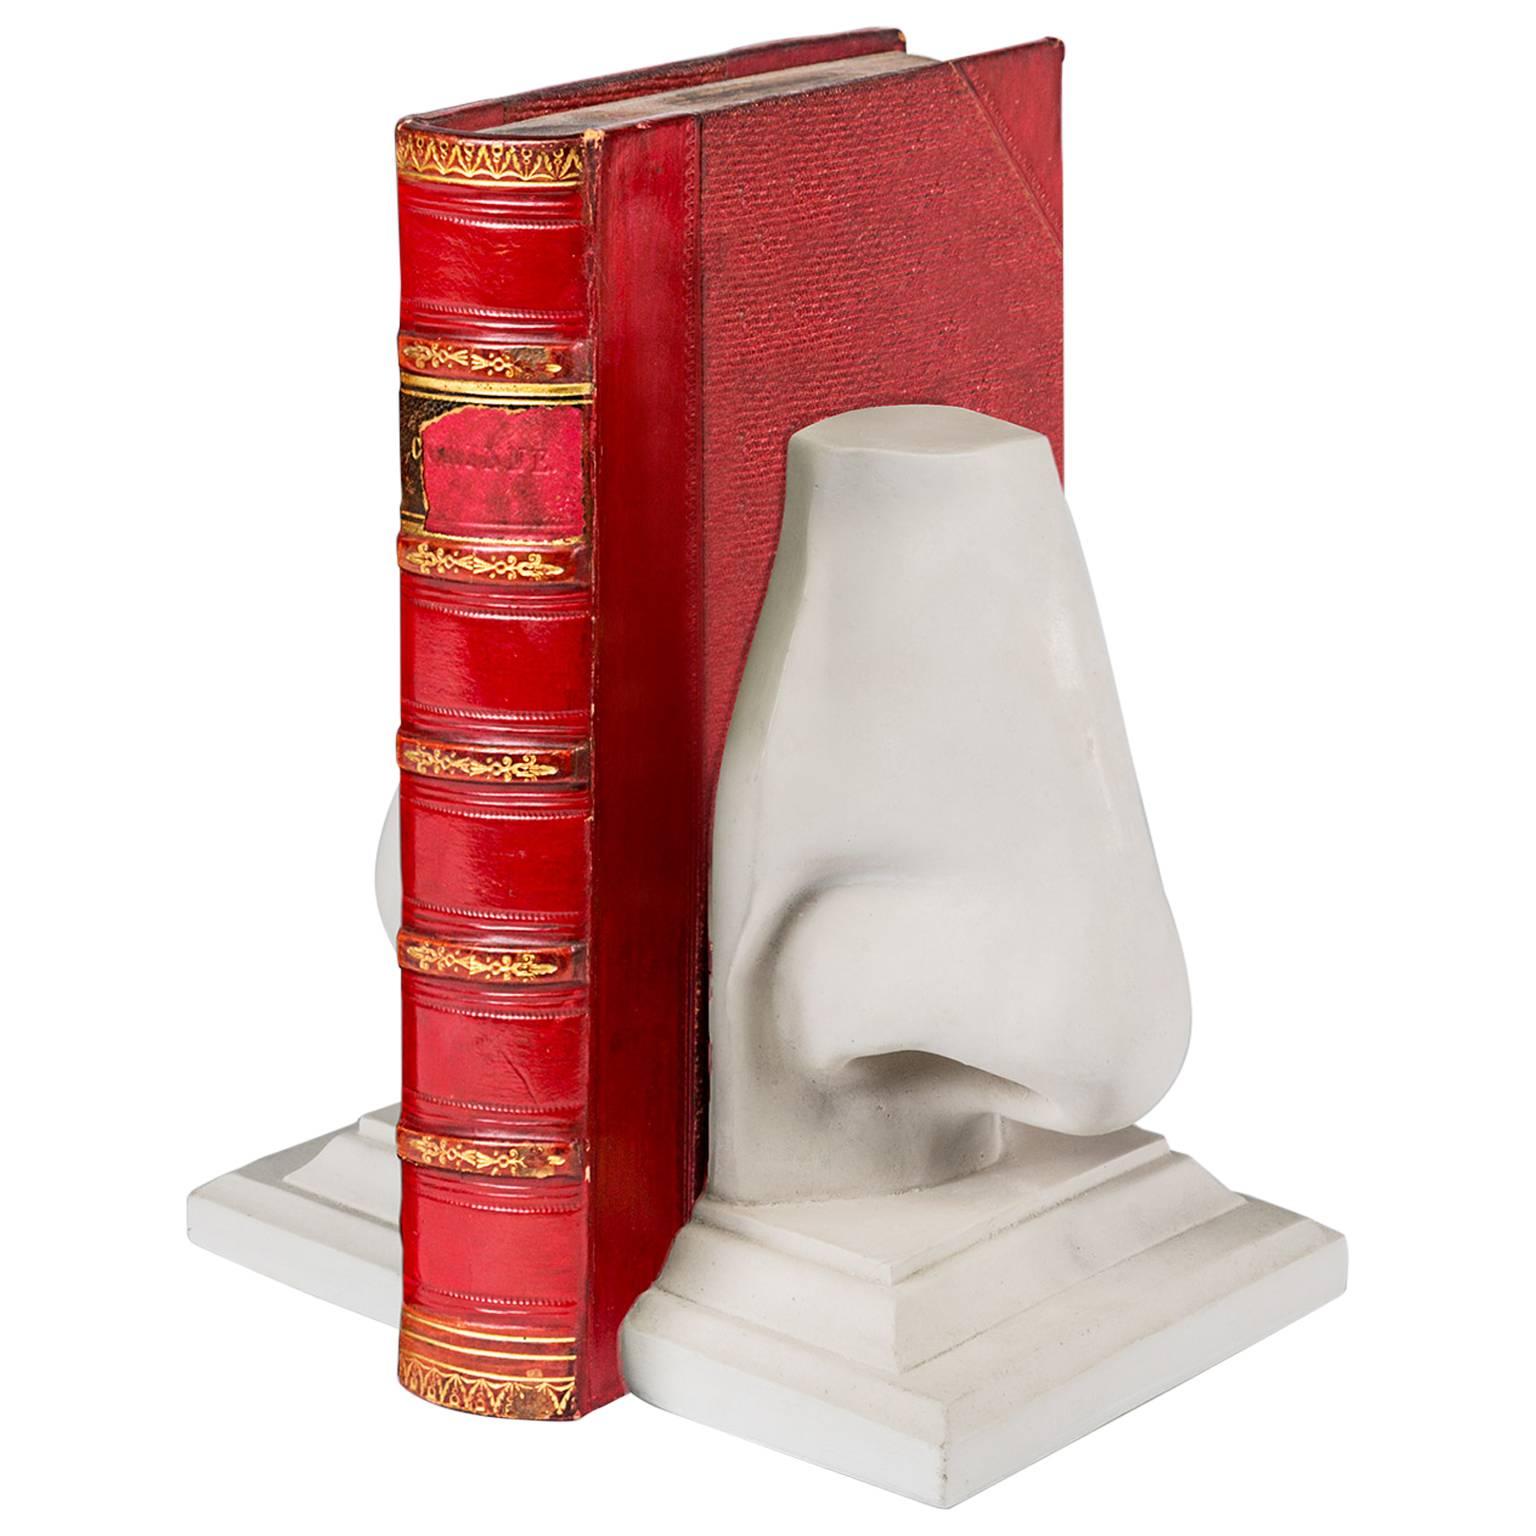 Resin nose bookend- sold individually. We have a limited number of these editions available.